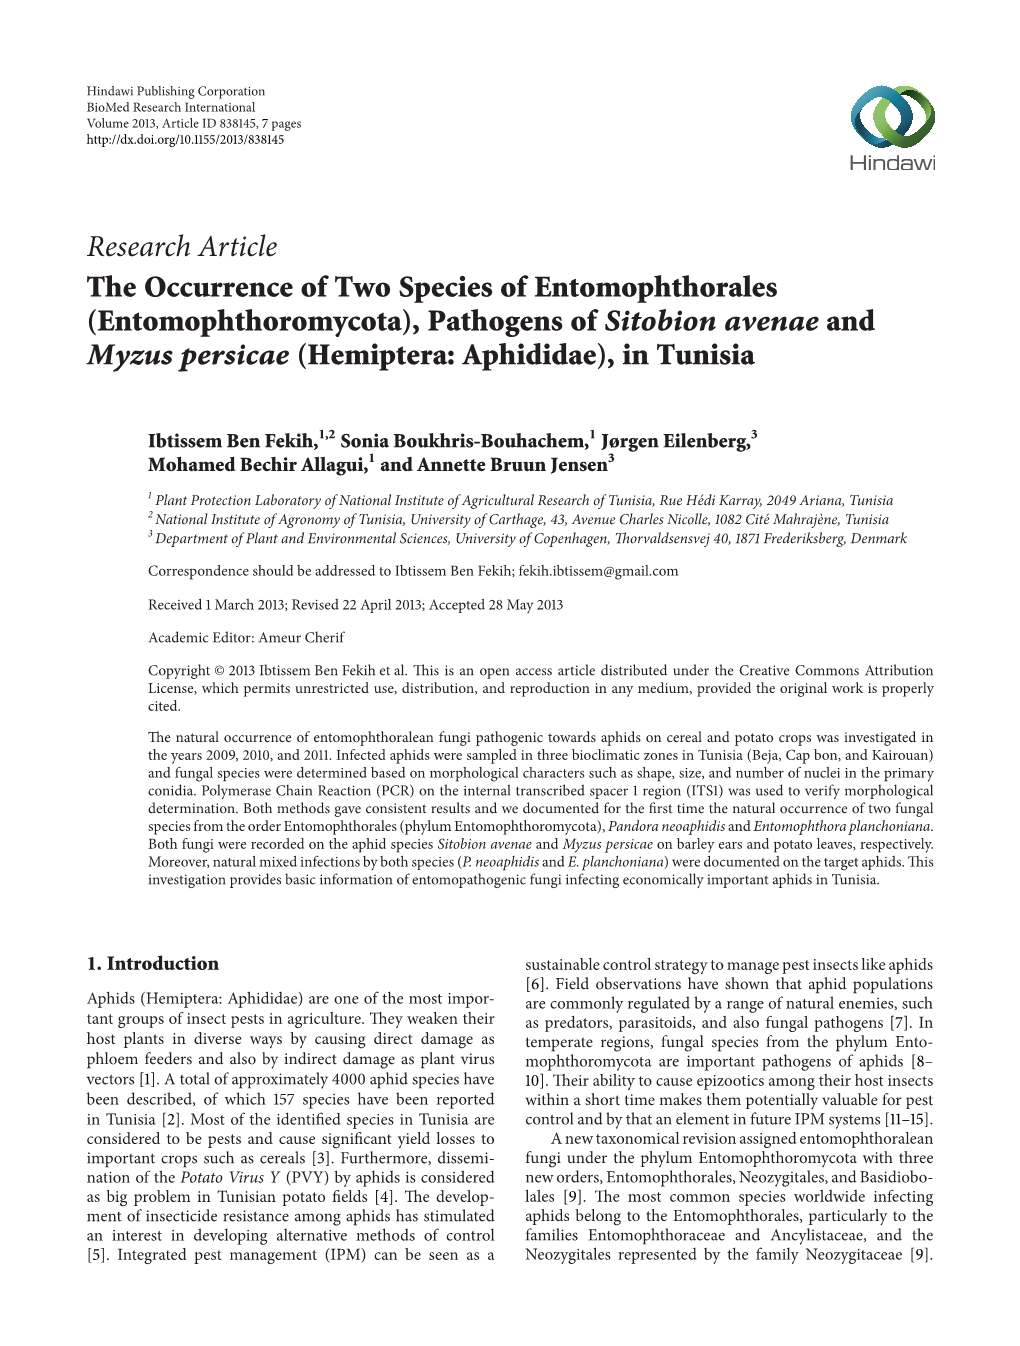 The Occurrence of Two Species of Entomophthorales (Entomophthoromycota), Pathogens of Sitobion Avenae and Myzus Persicae (Hemiptera: Aphididae), in Tunisia